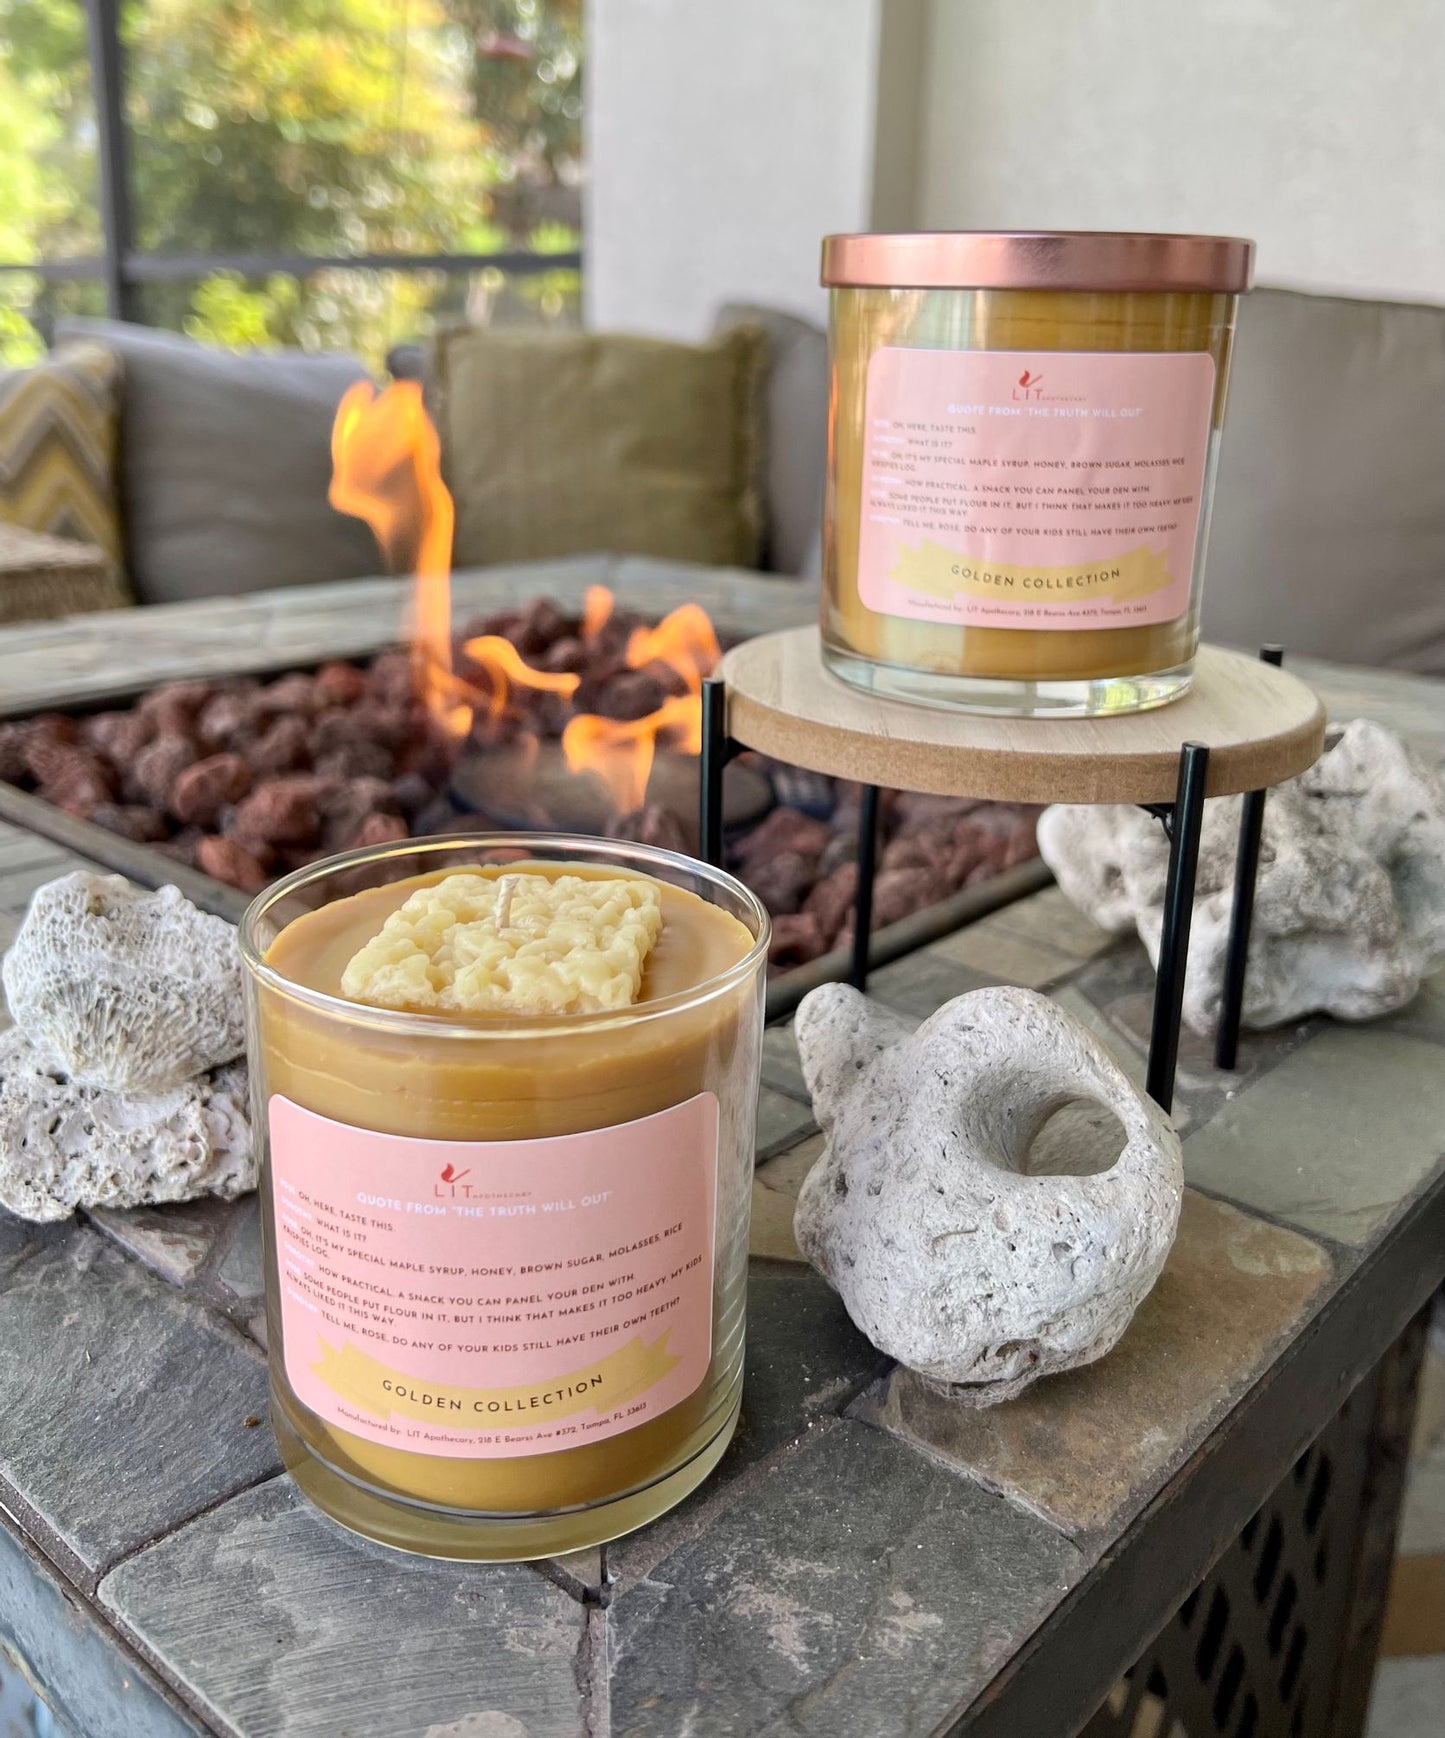 Rose Golden Girl Candle - Golden Collection - Brown Sugar Cinnamon Molasses Candle